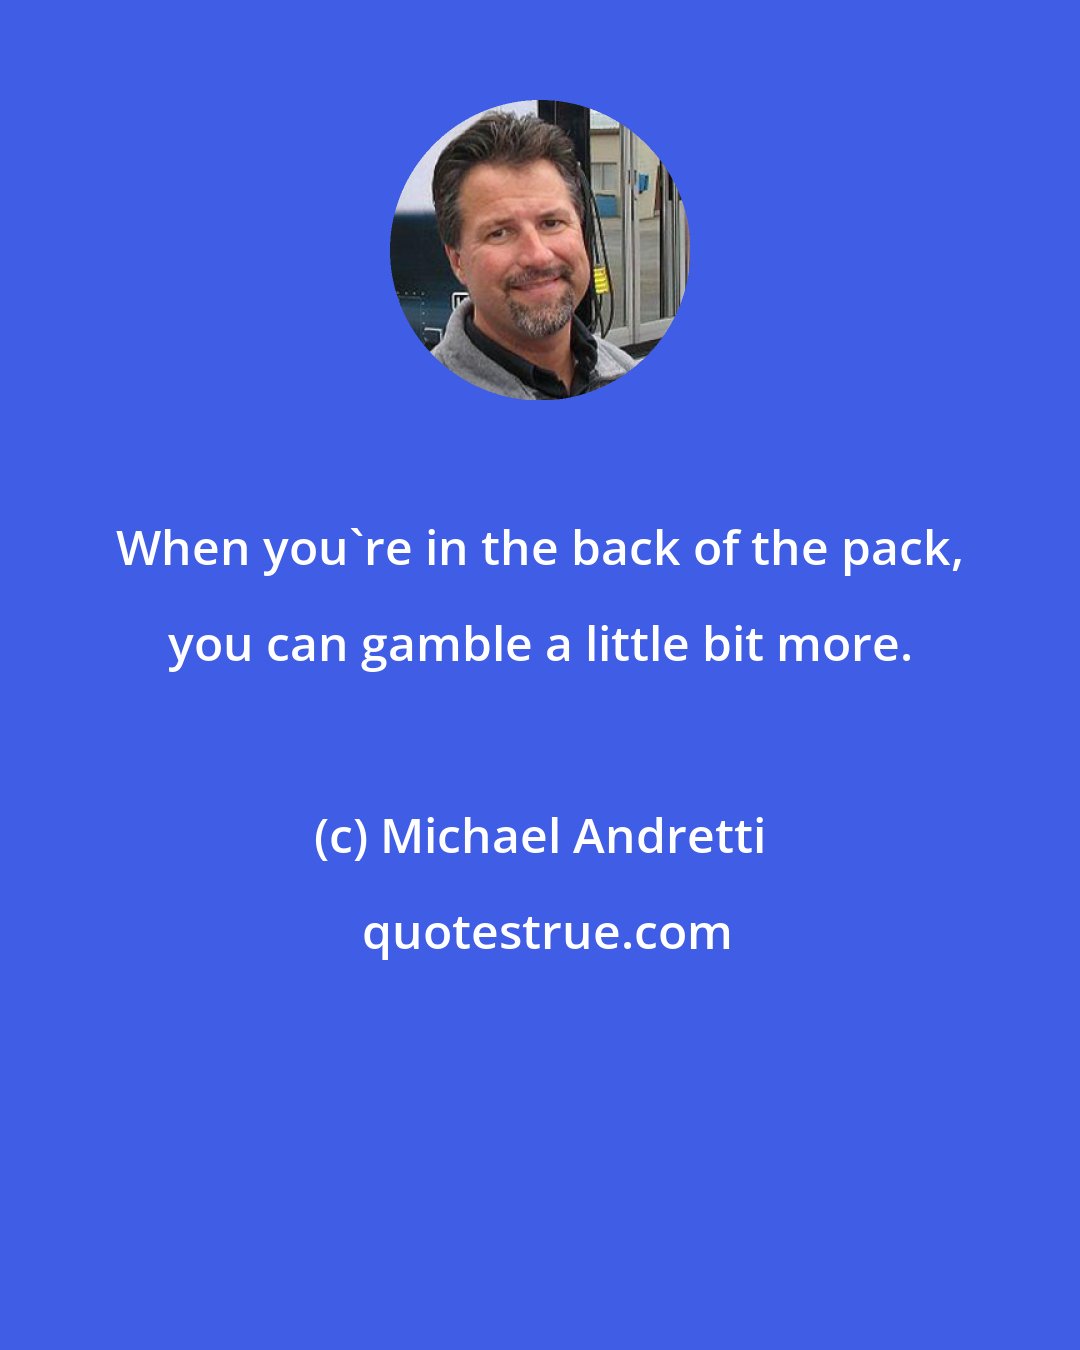 Michael Andretti: When you're in the back of the pack, you can gamble a little bit more.